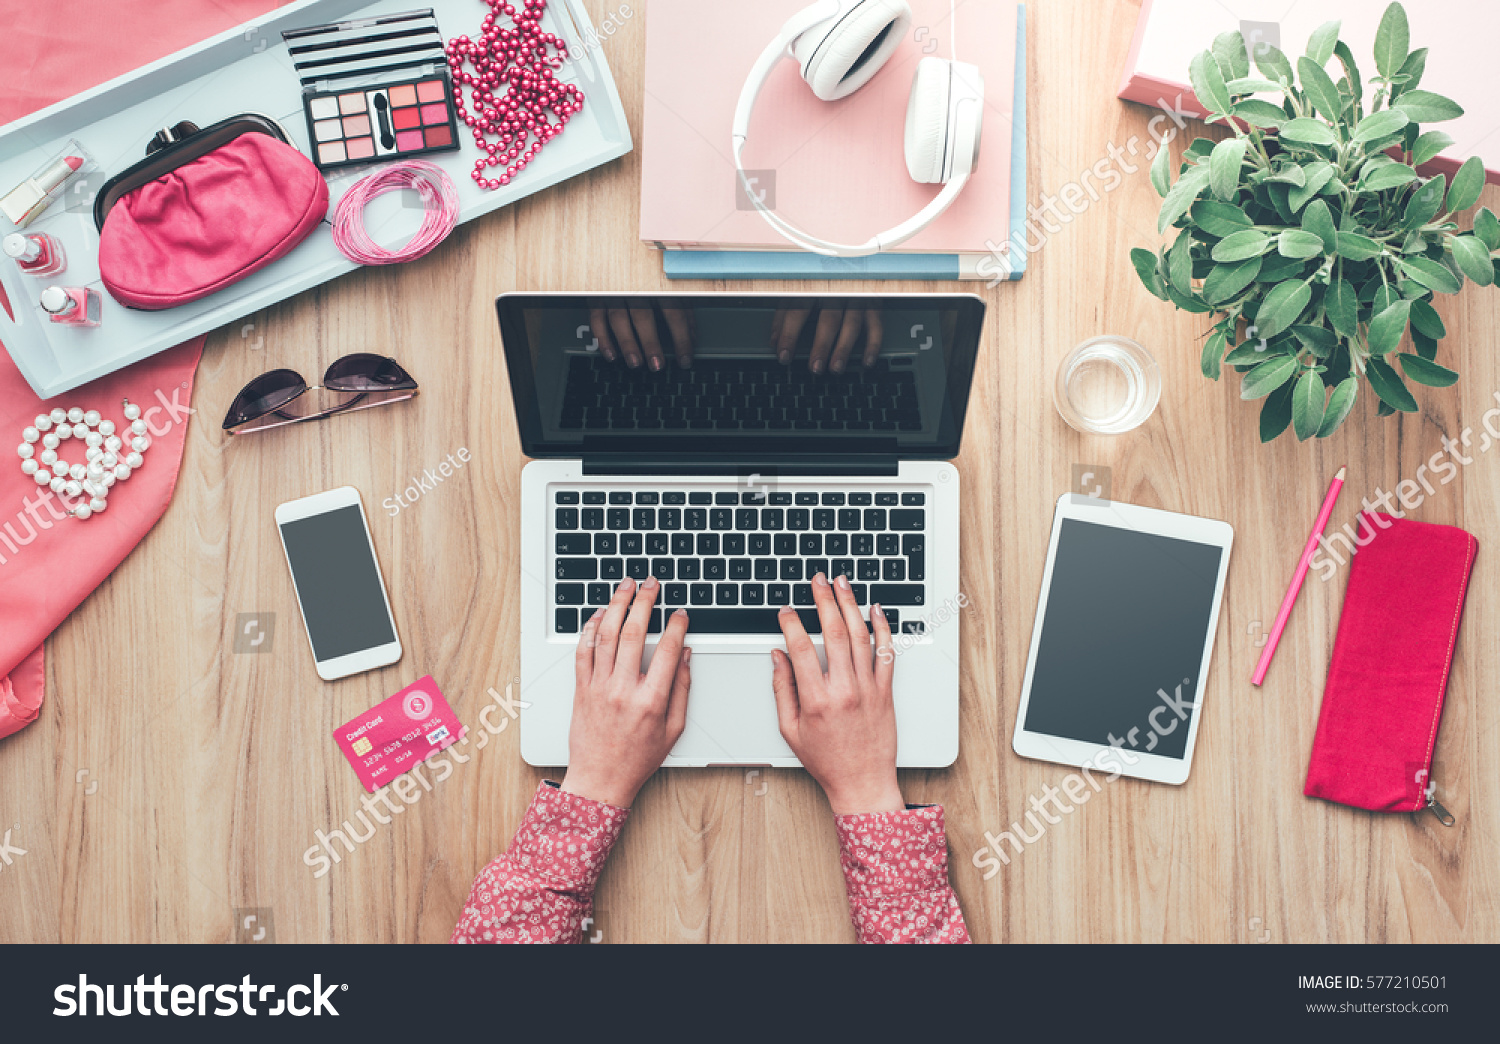 stock-photo-fashion-blogger-working-at-office-desk-with-a-laptop-fashion-beauty-and-technology-concept-577210501